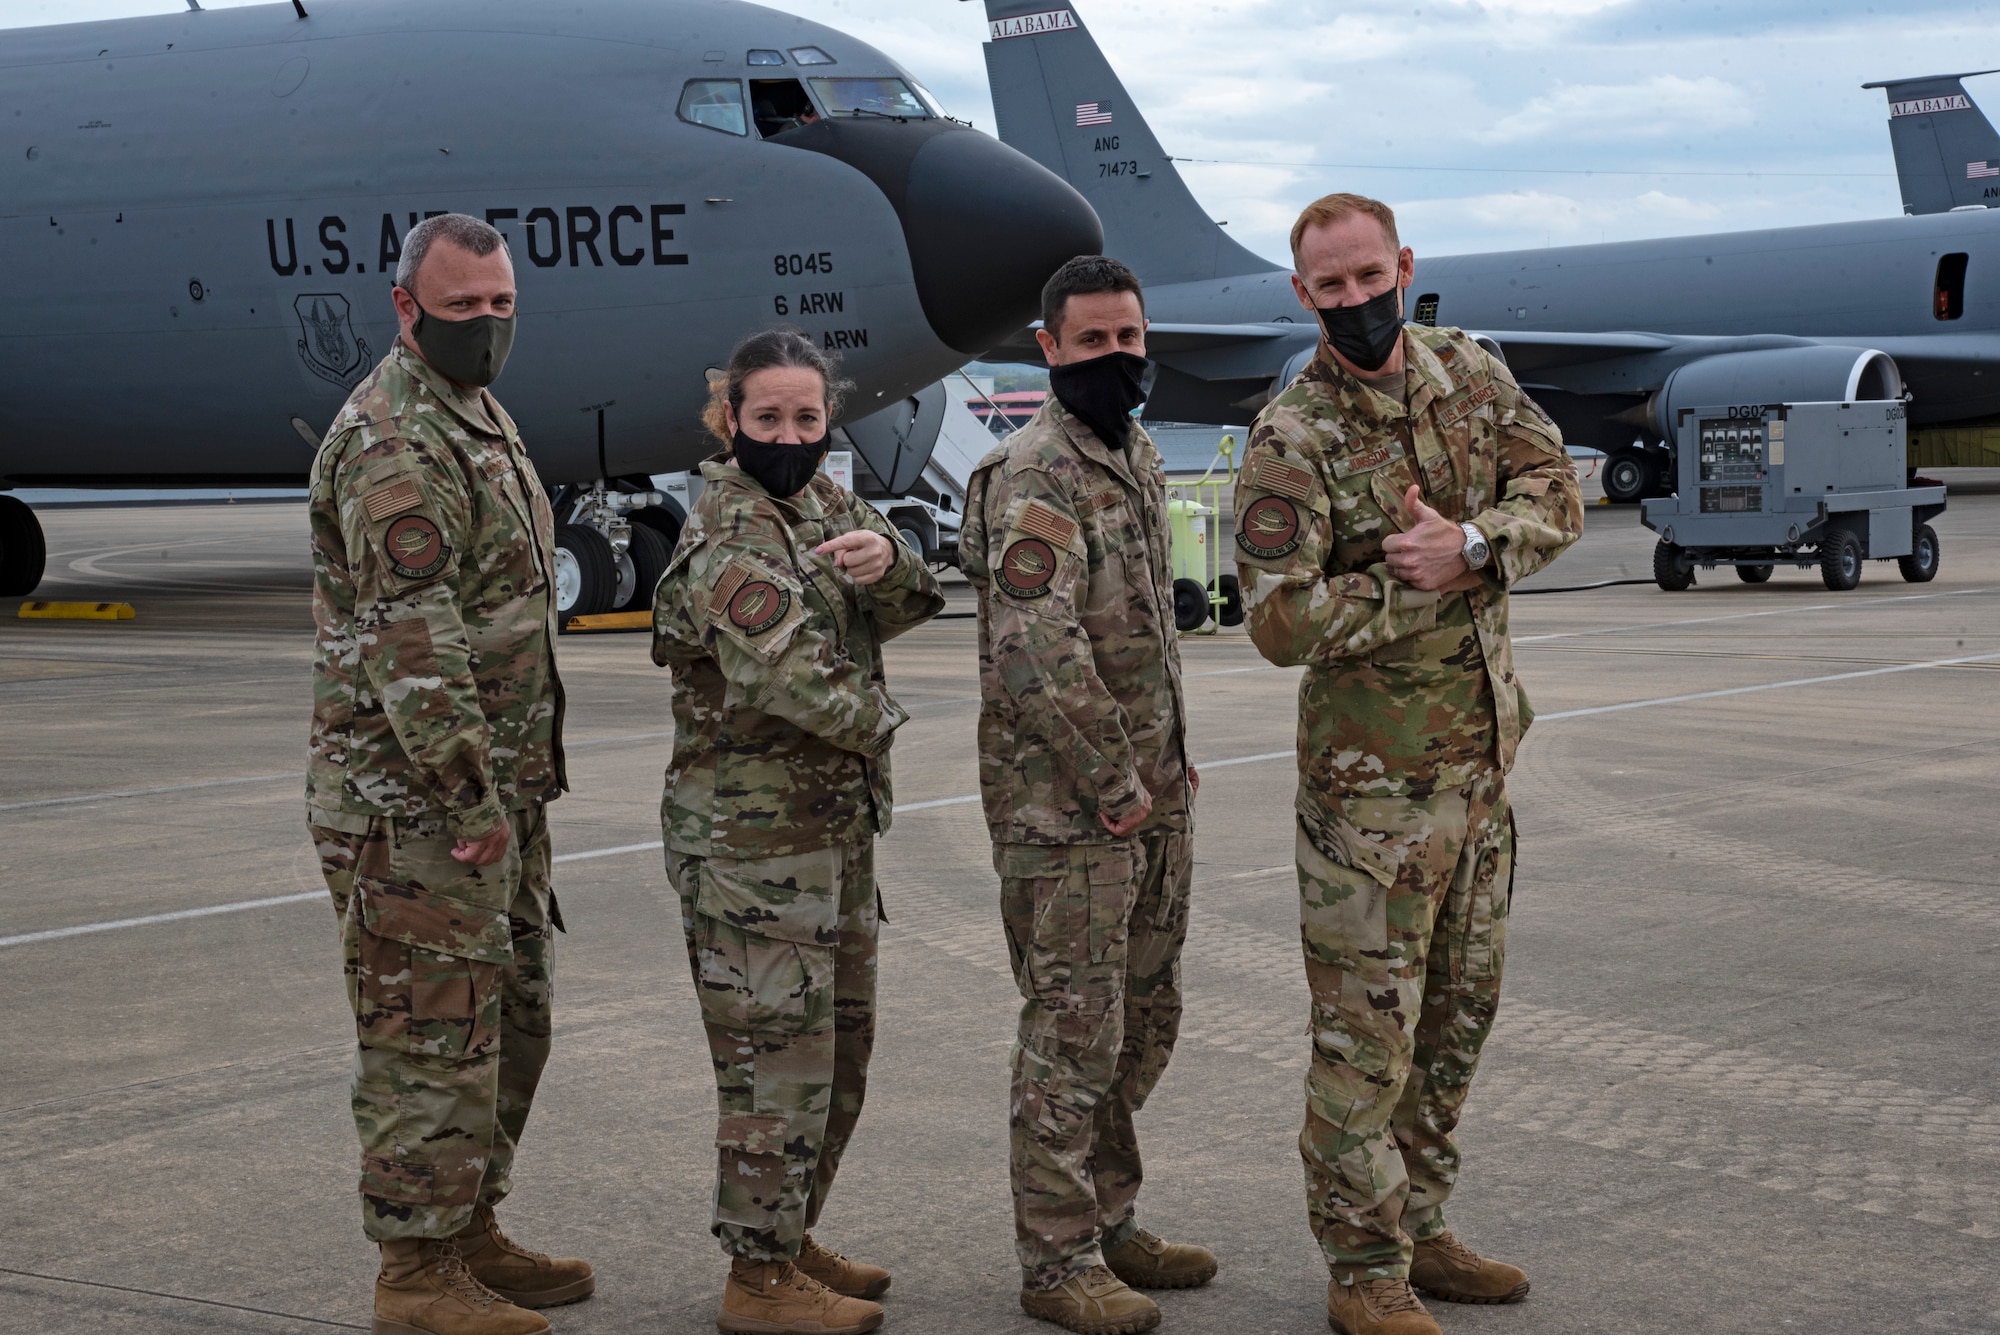 U.S. Air Force Chief Master Sgt. Wade Claussen, 99th Air Refueling Squadron superintendent, Chief Master Sgt. Shae Gee, 6th Air Refueling Wing command chief, Lt. Col. Doug Curran, 99th ARS commander and Col. Ben Jonsson, 6th ARW commander pause for a photo on the flight line at Sumpter Smith Joint National Guard Base, in Birmingham, Ala., March 30, 2021.